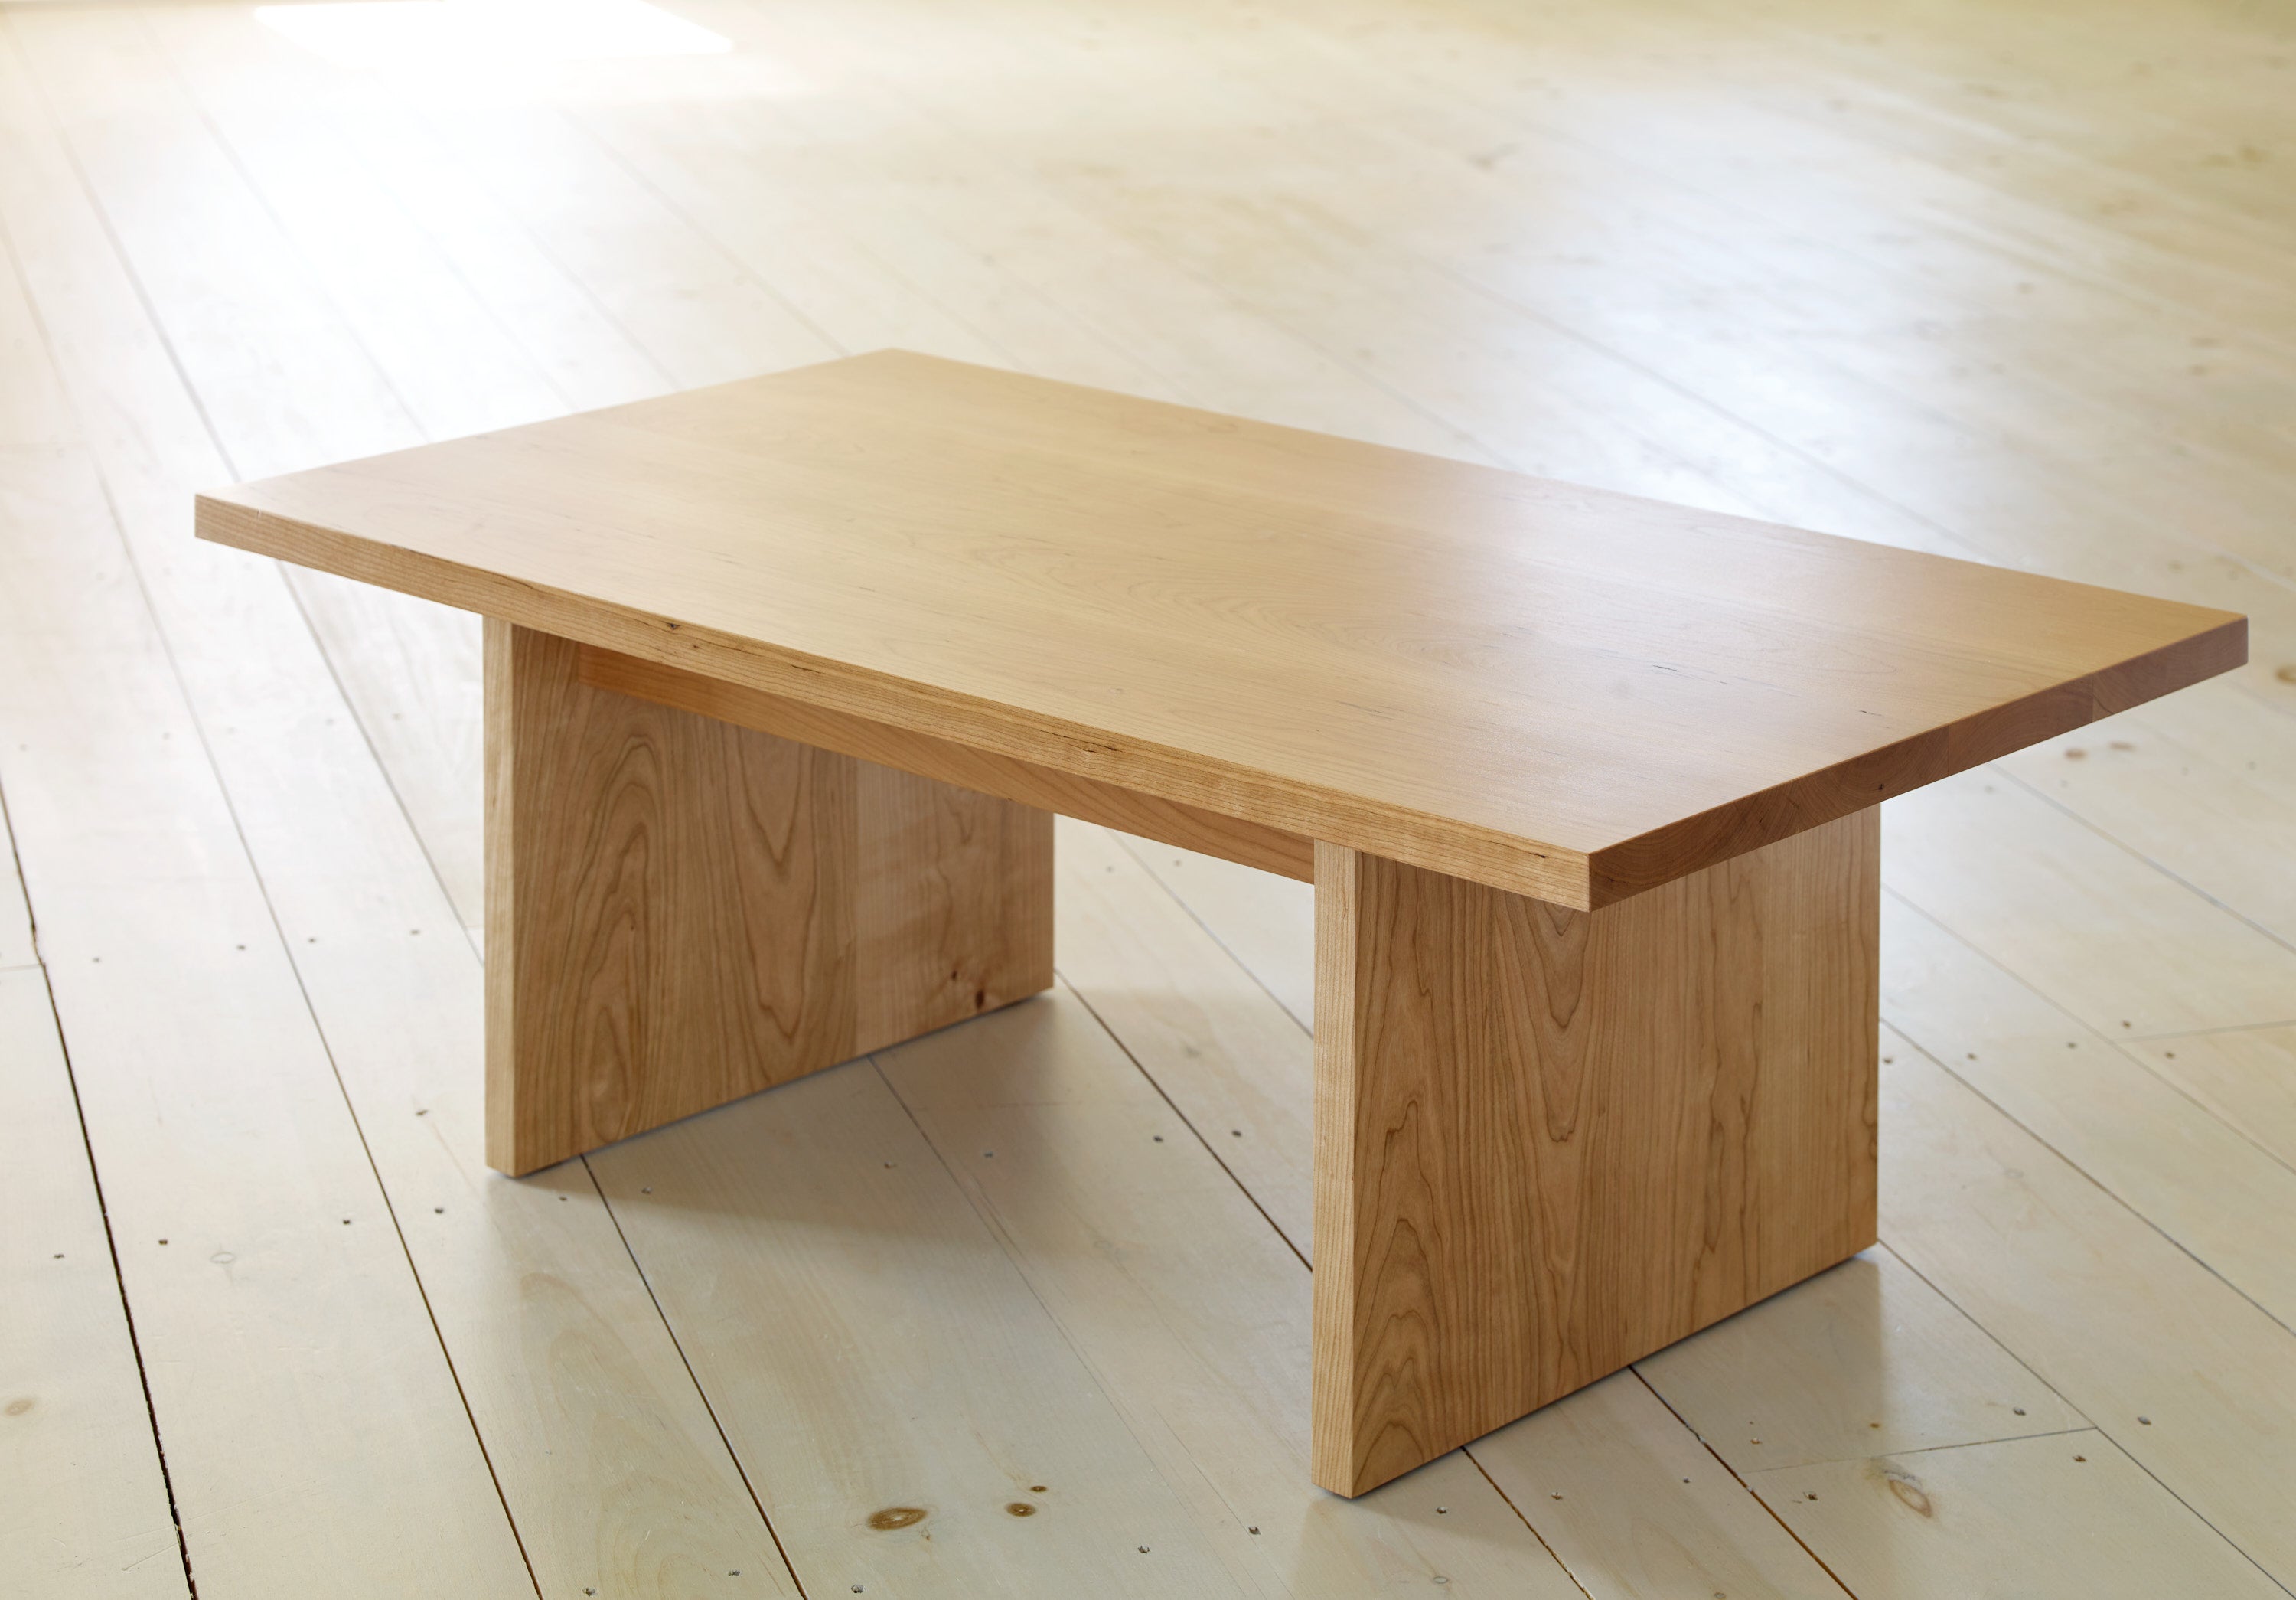 Cherry wood Hygge Coffee Table on wood pine floors in bright room